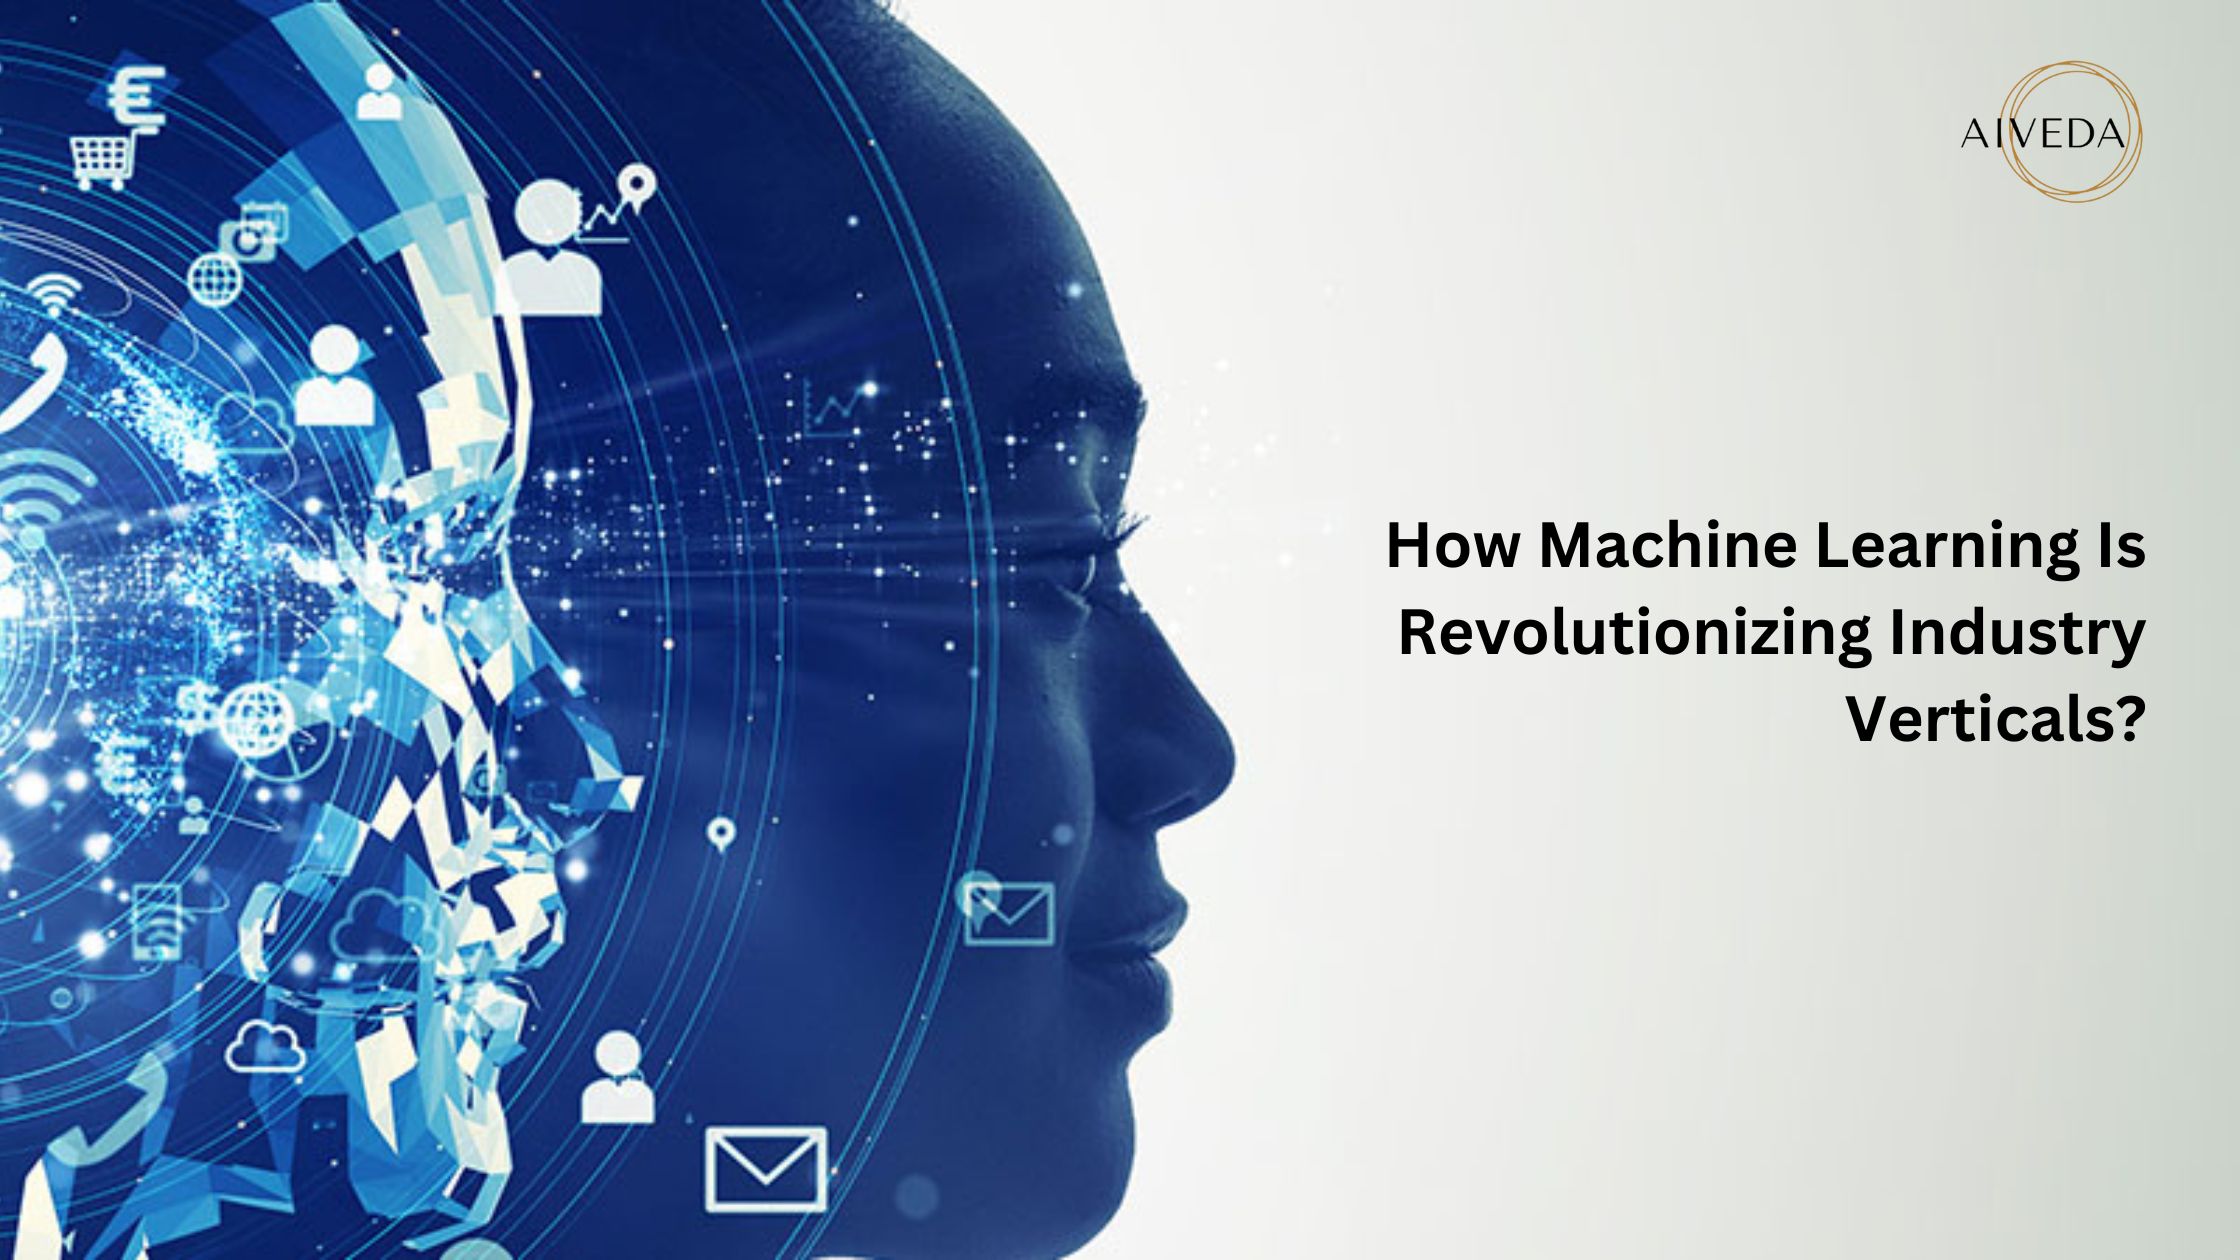 How Machine Learning Is Revolutionizing Industry Verticals